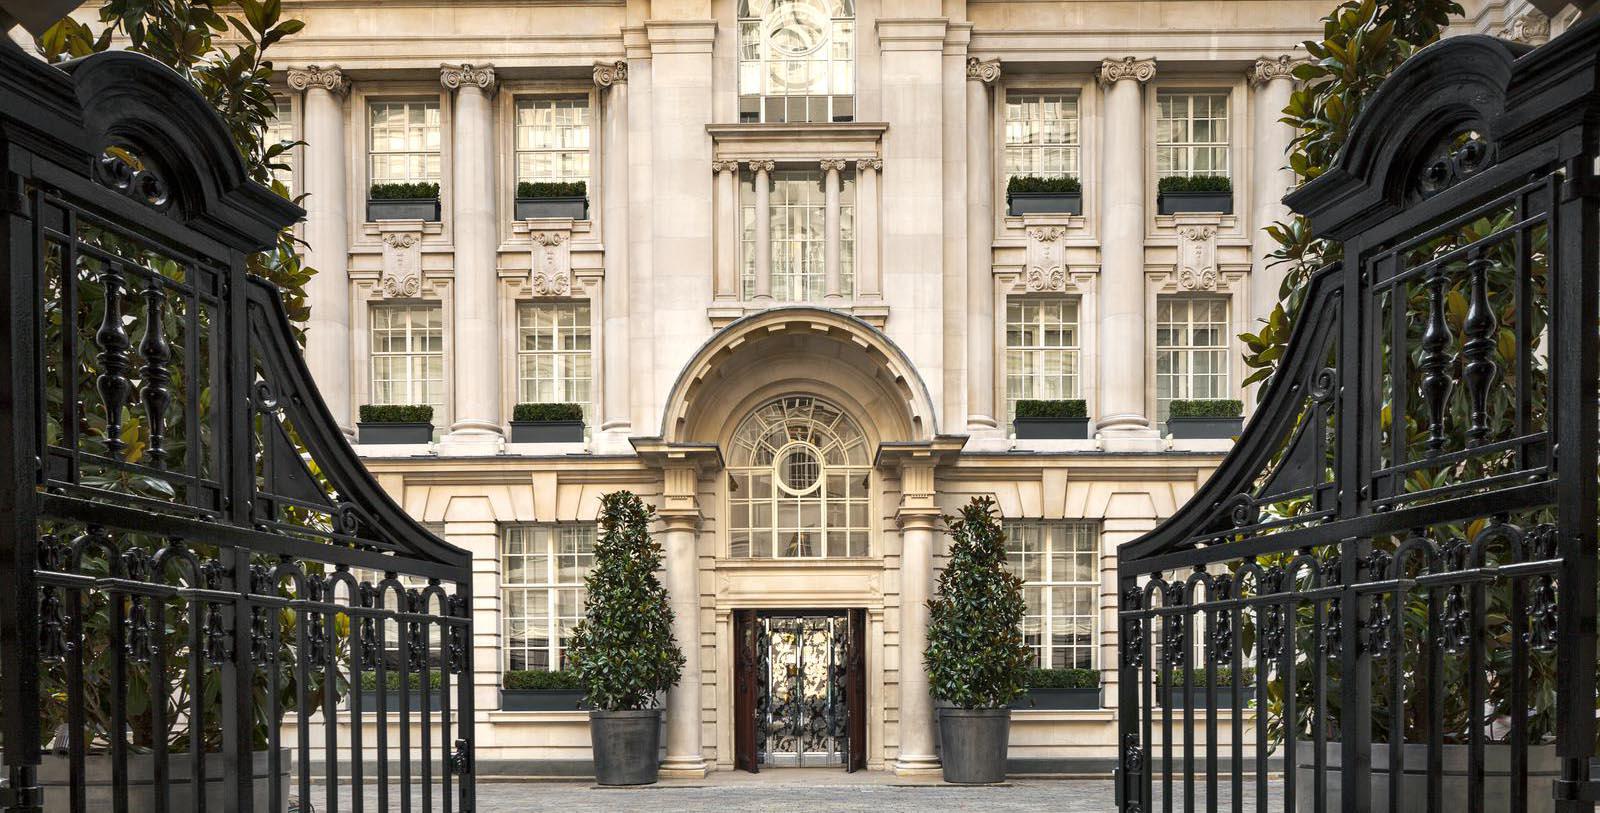 Discover the grand archway that leads directly into the Rosewood London’s iconic Edwardian courtyard.